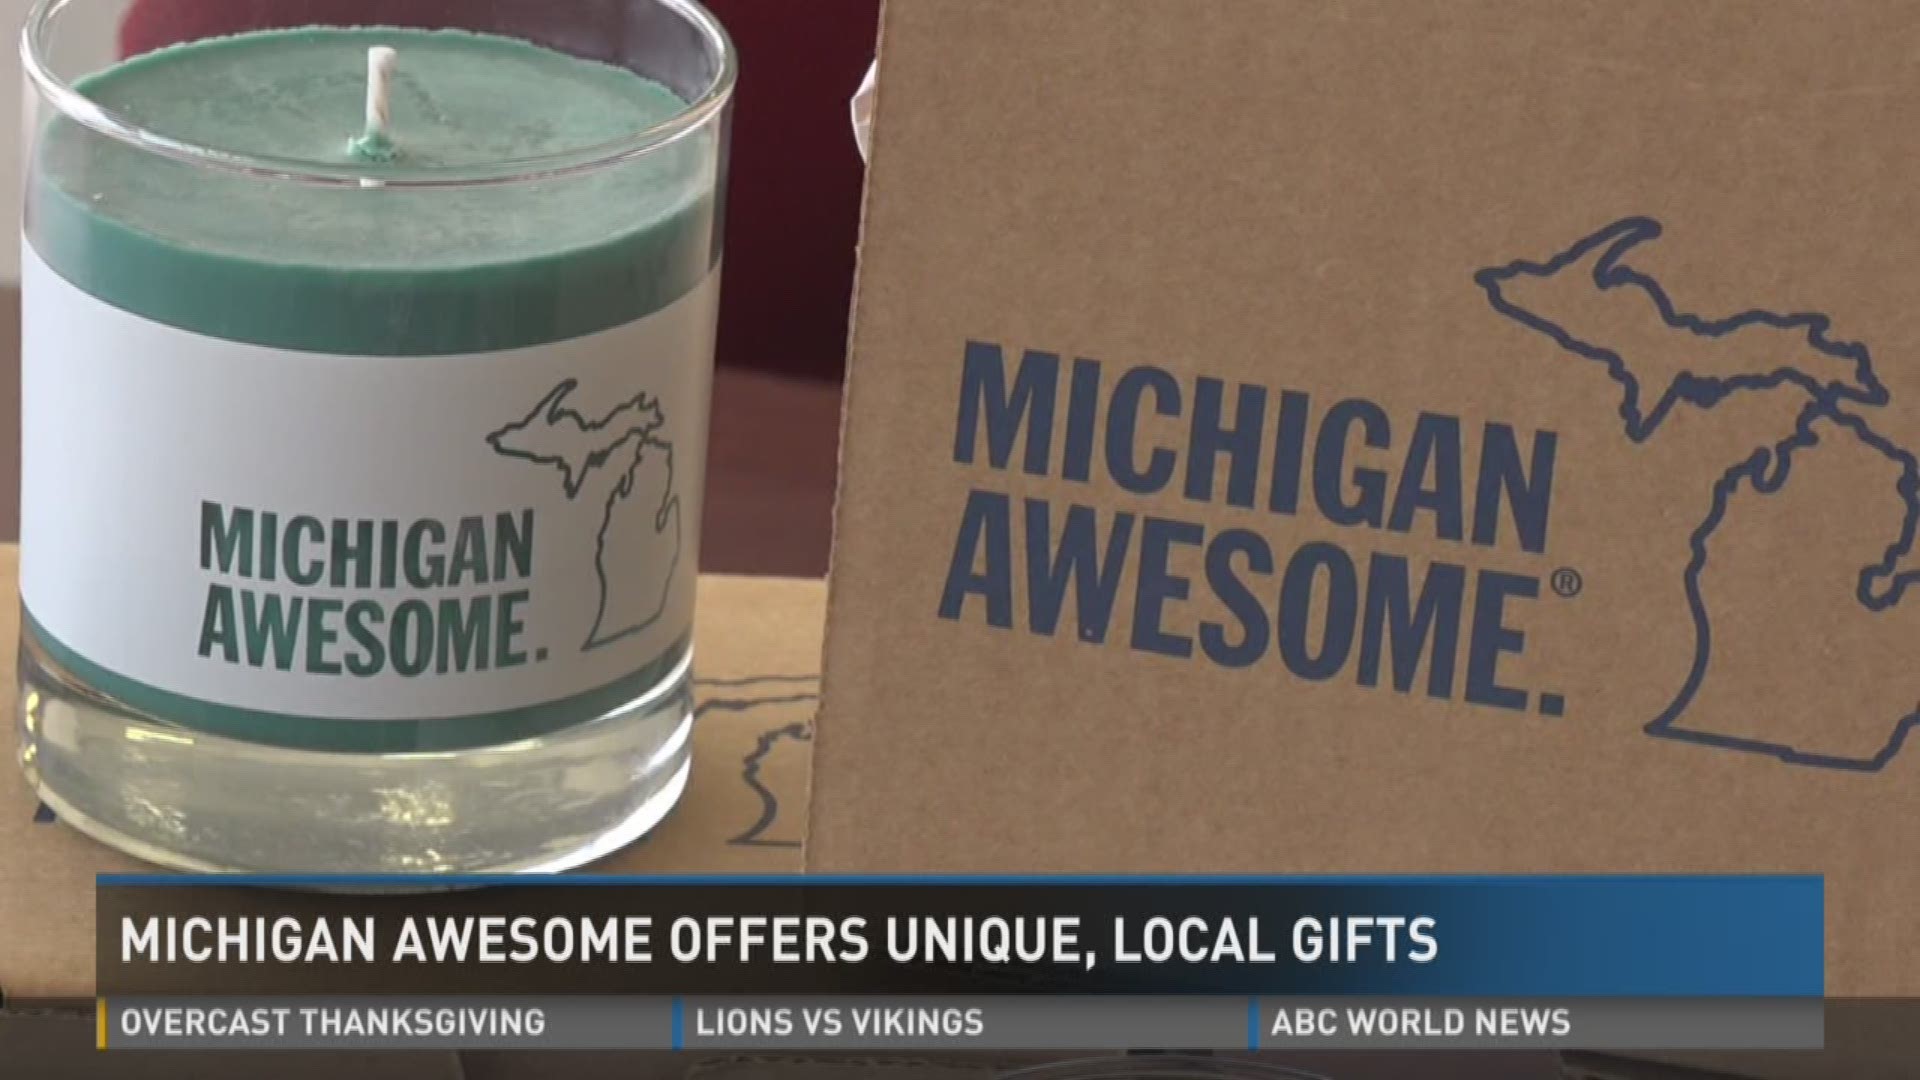 Michigan Awesome offers unique local gifts